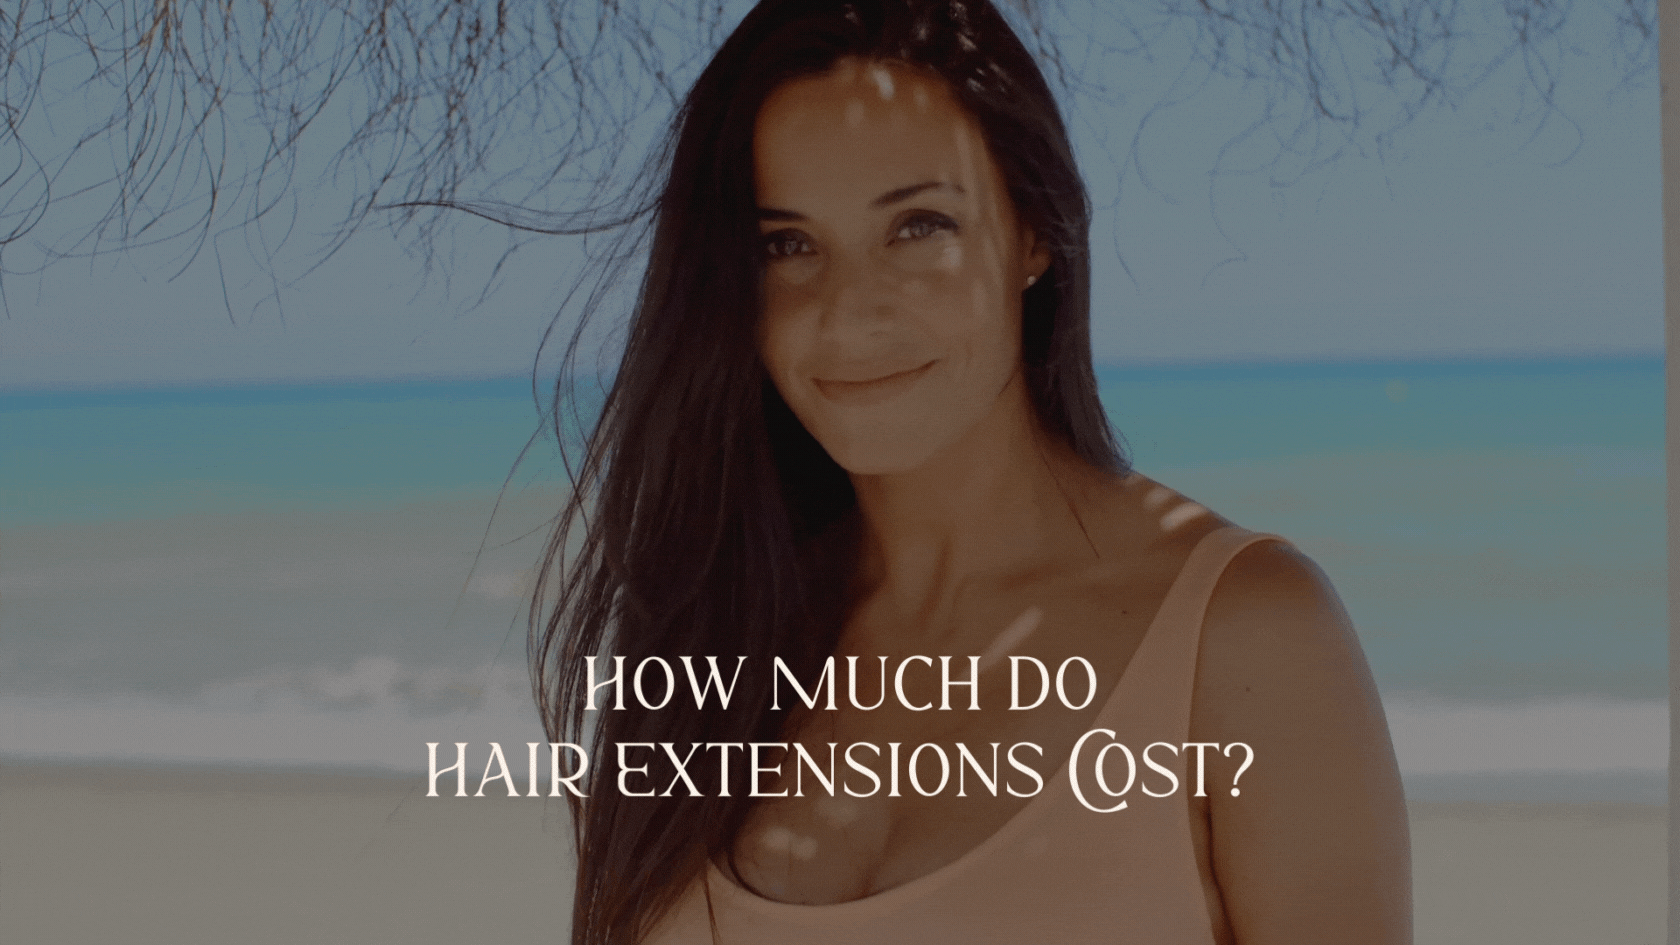 how much are hair extensions, how much do hair extensions cost, sew in hair extensions cost